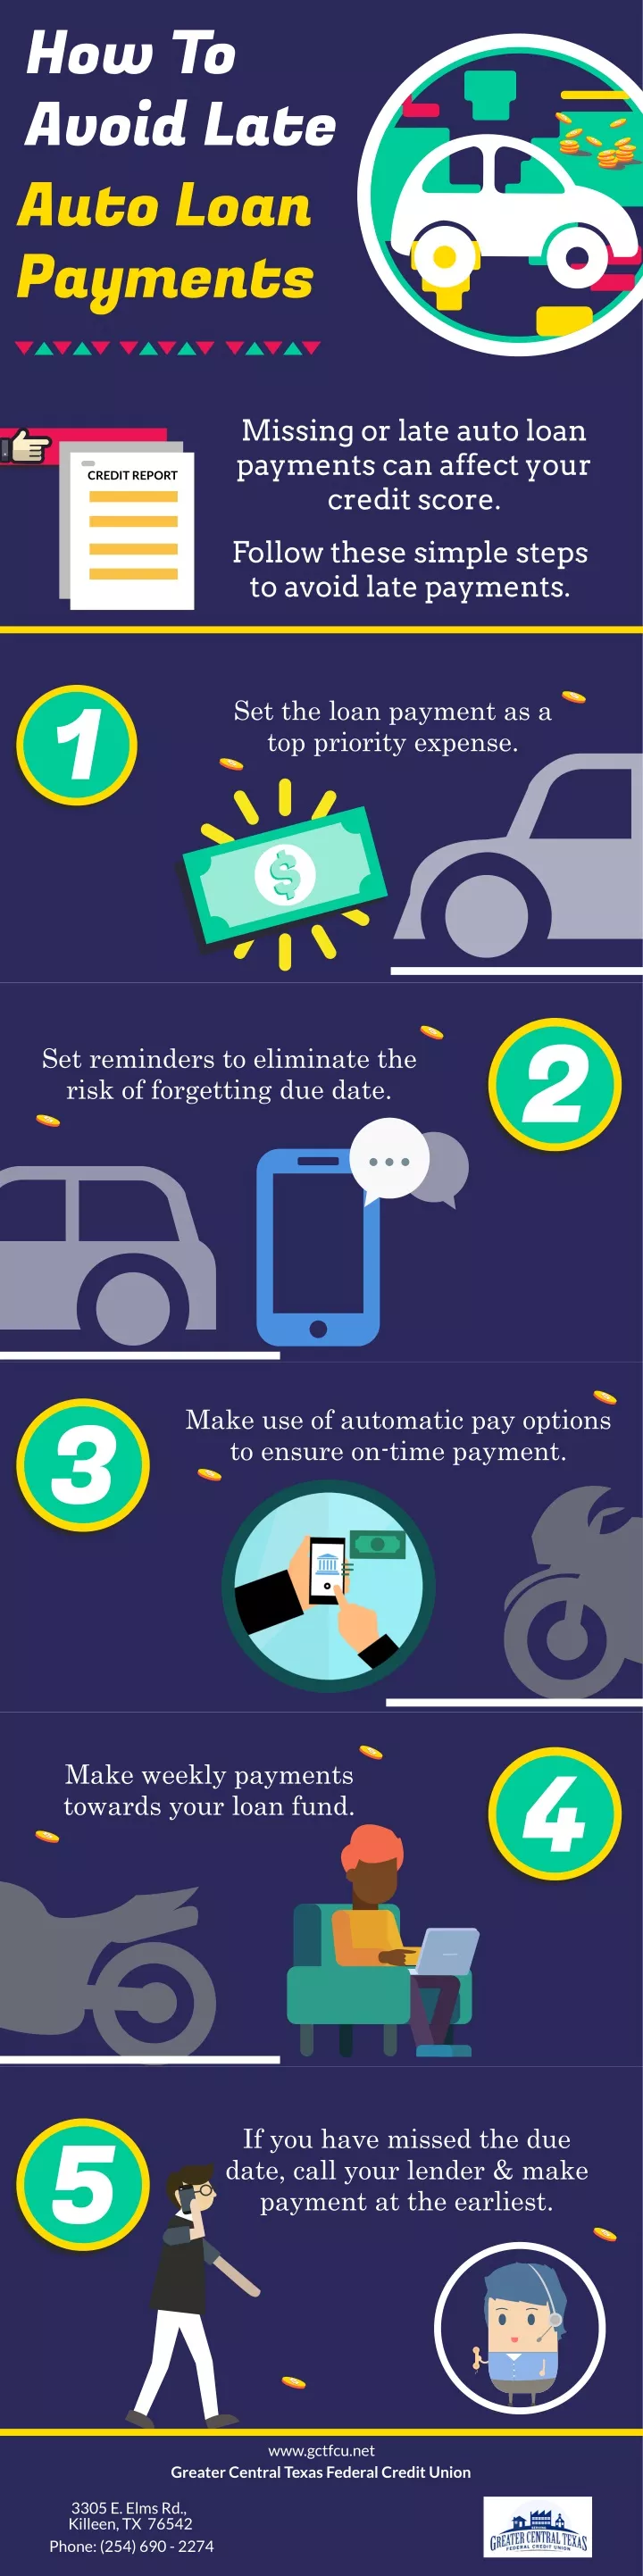 how to avoid late auto loan payments